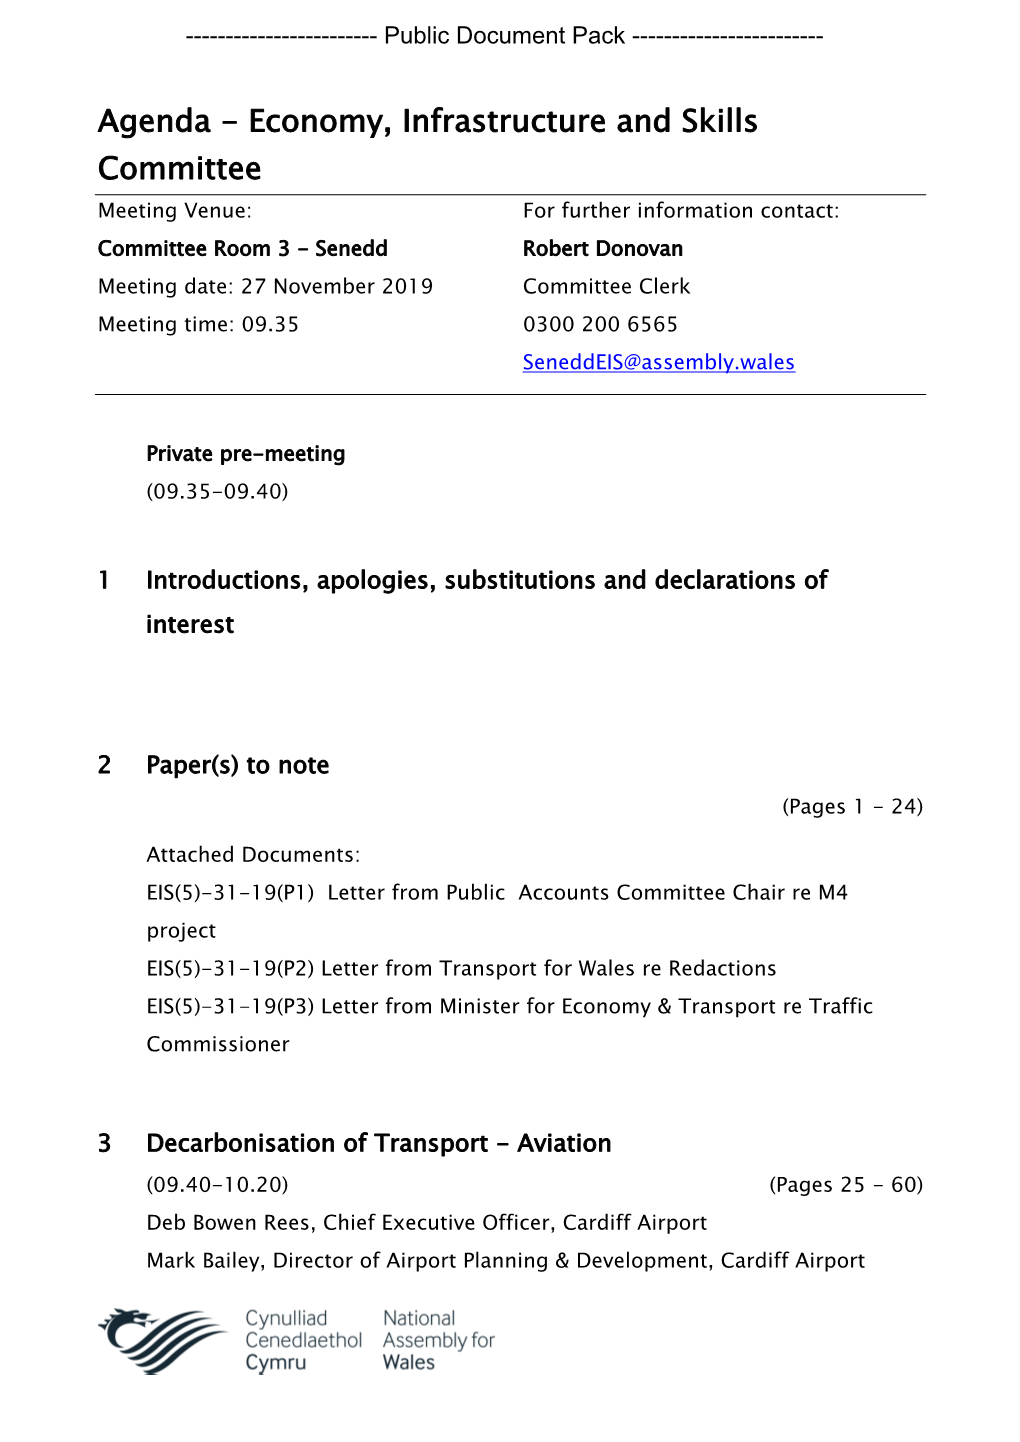 (Public Pack)Agenda Document for Economy, Infrastructure and Skills Committee, 27/11/2019 09:35